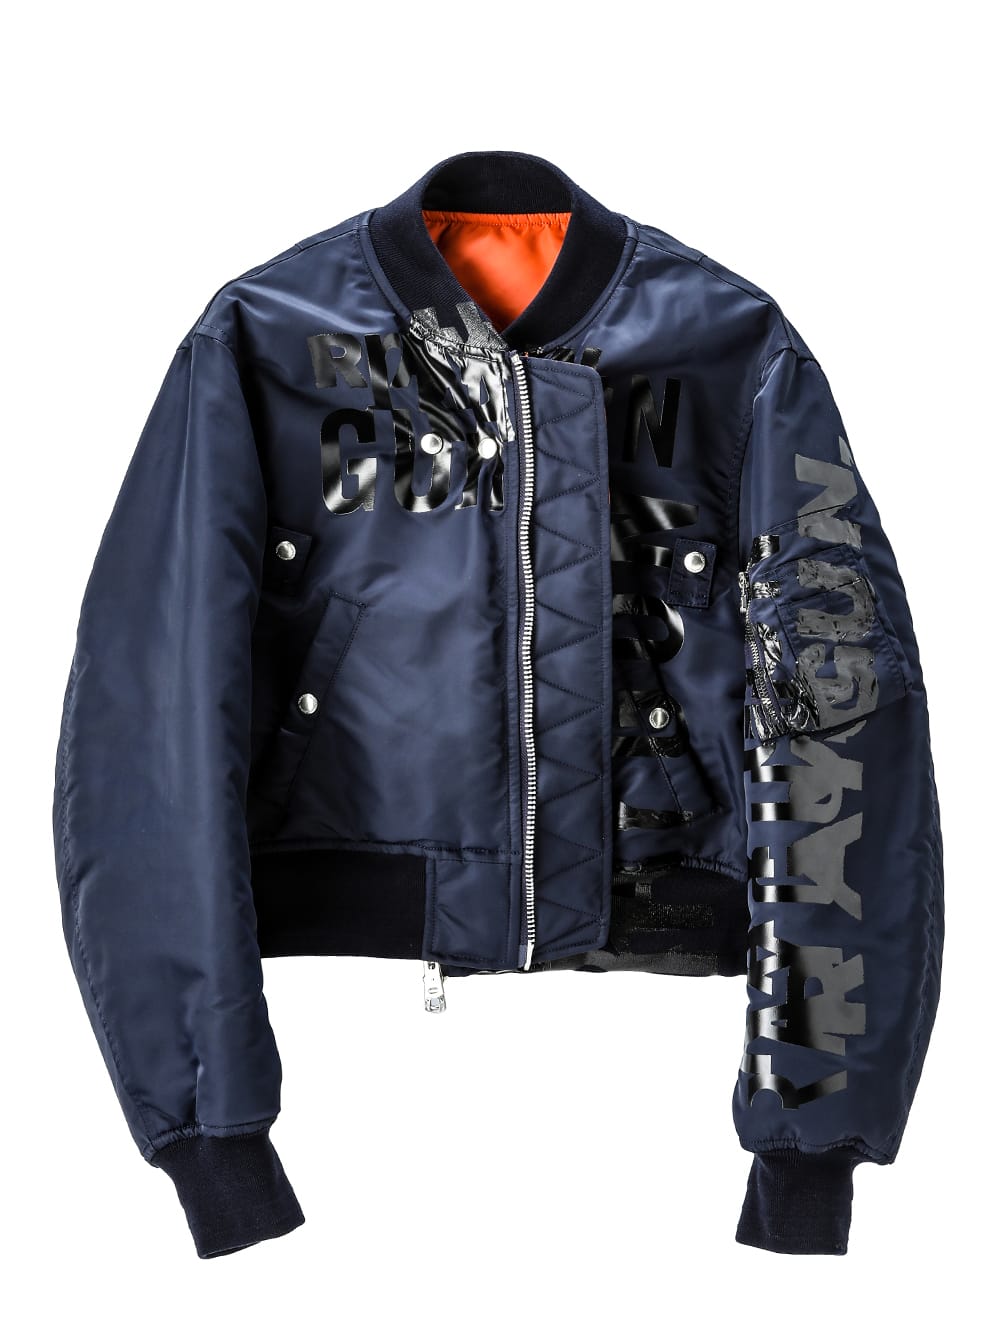 sj.0018aAW23-midnight two-way cropped bomber jacket. THE TWO OF US 